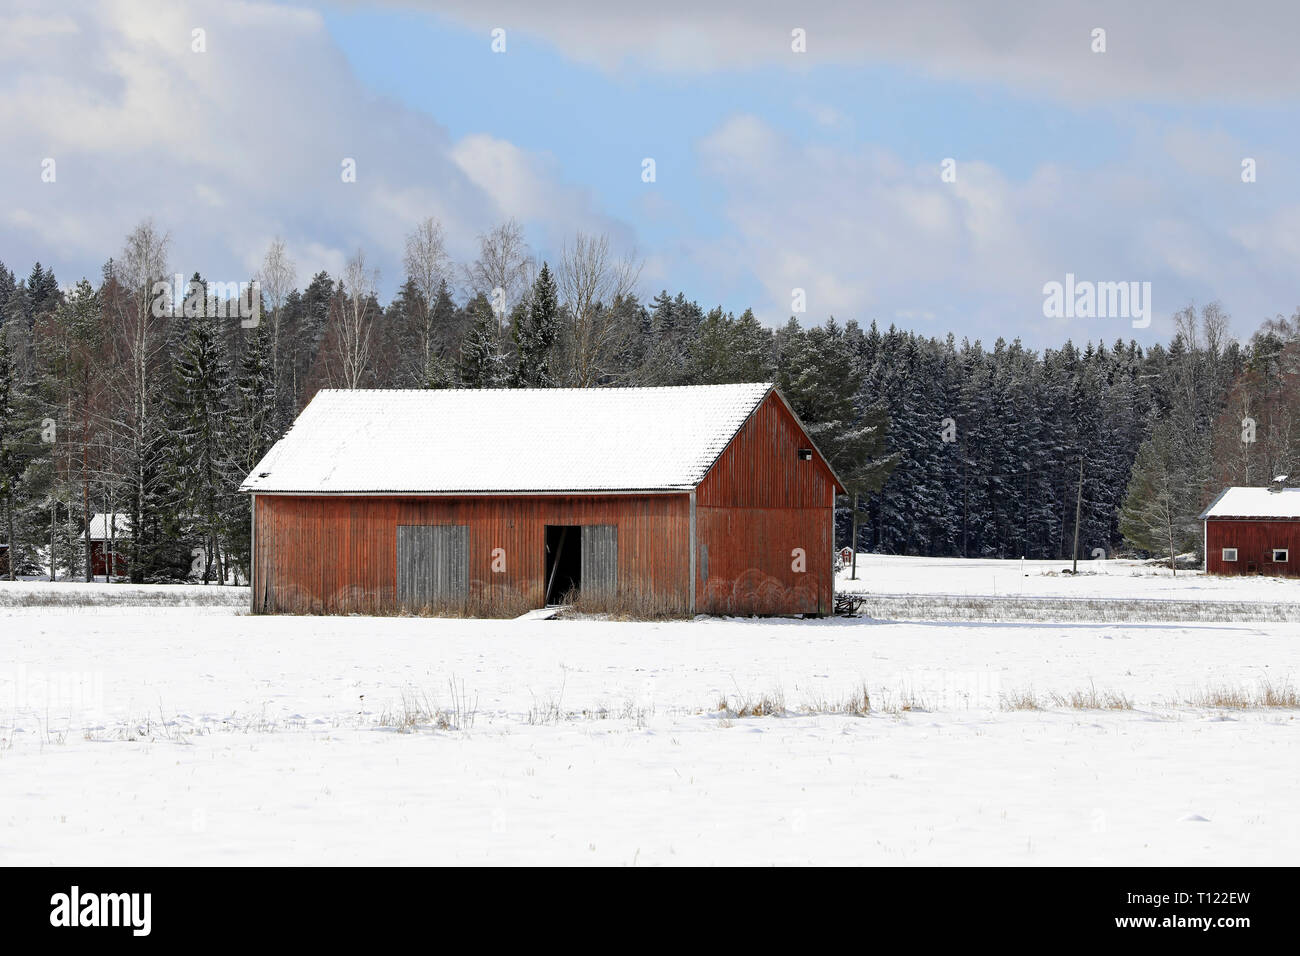 Rural landscape with red wooden barn in snowy field on a beautiful day of winter. Stock Photo